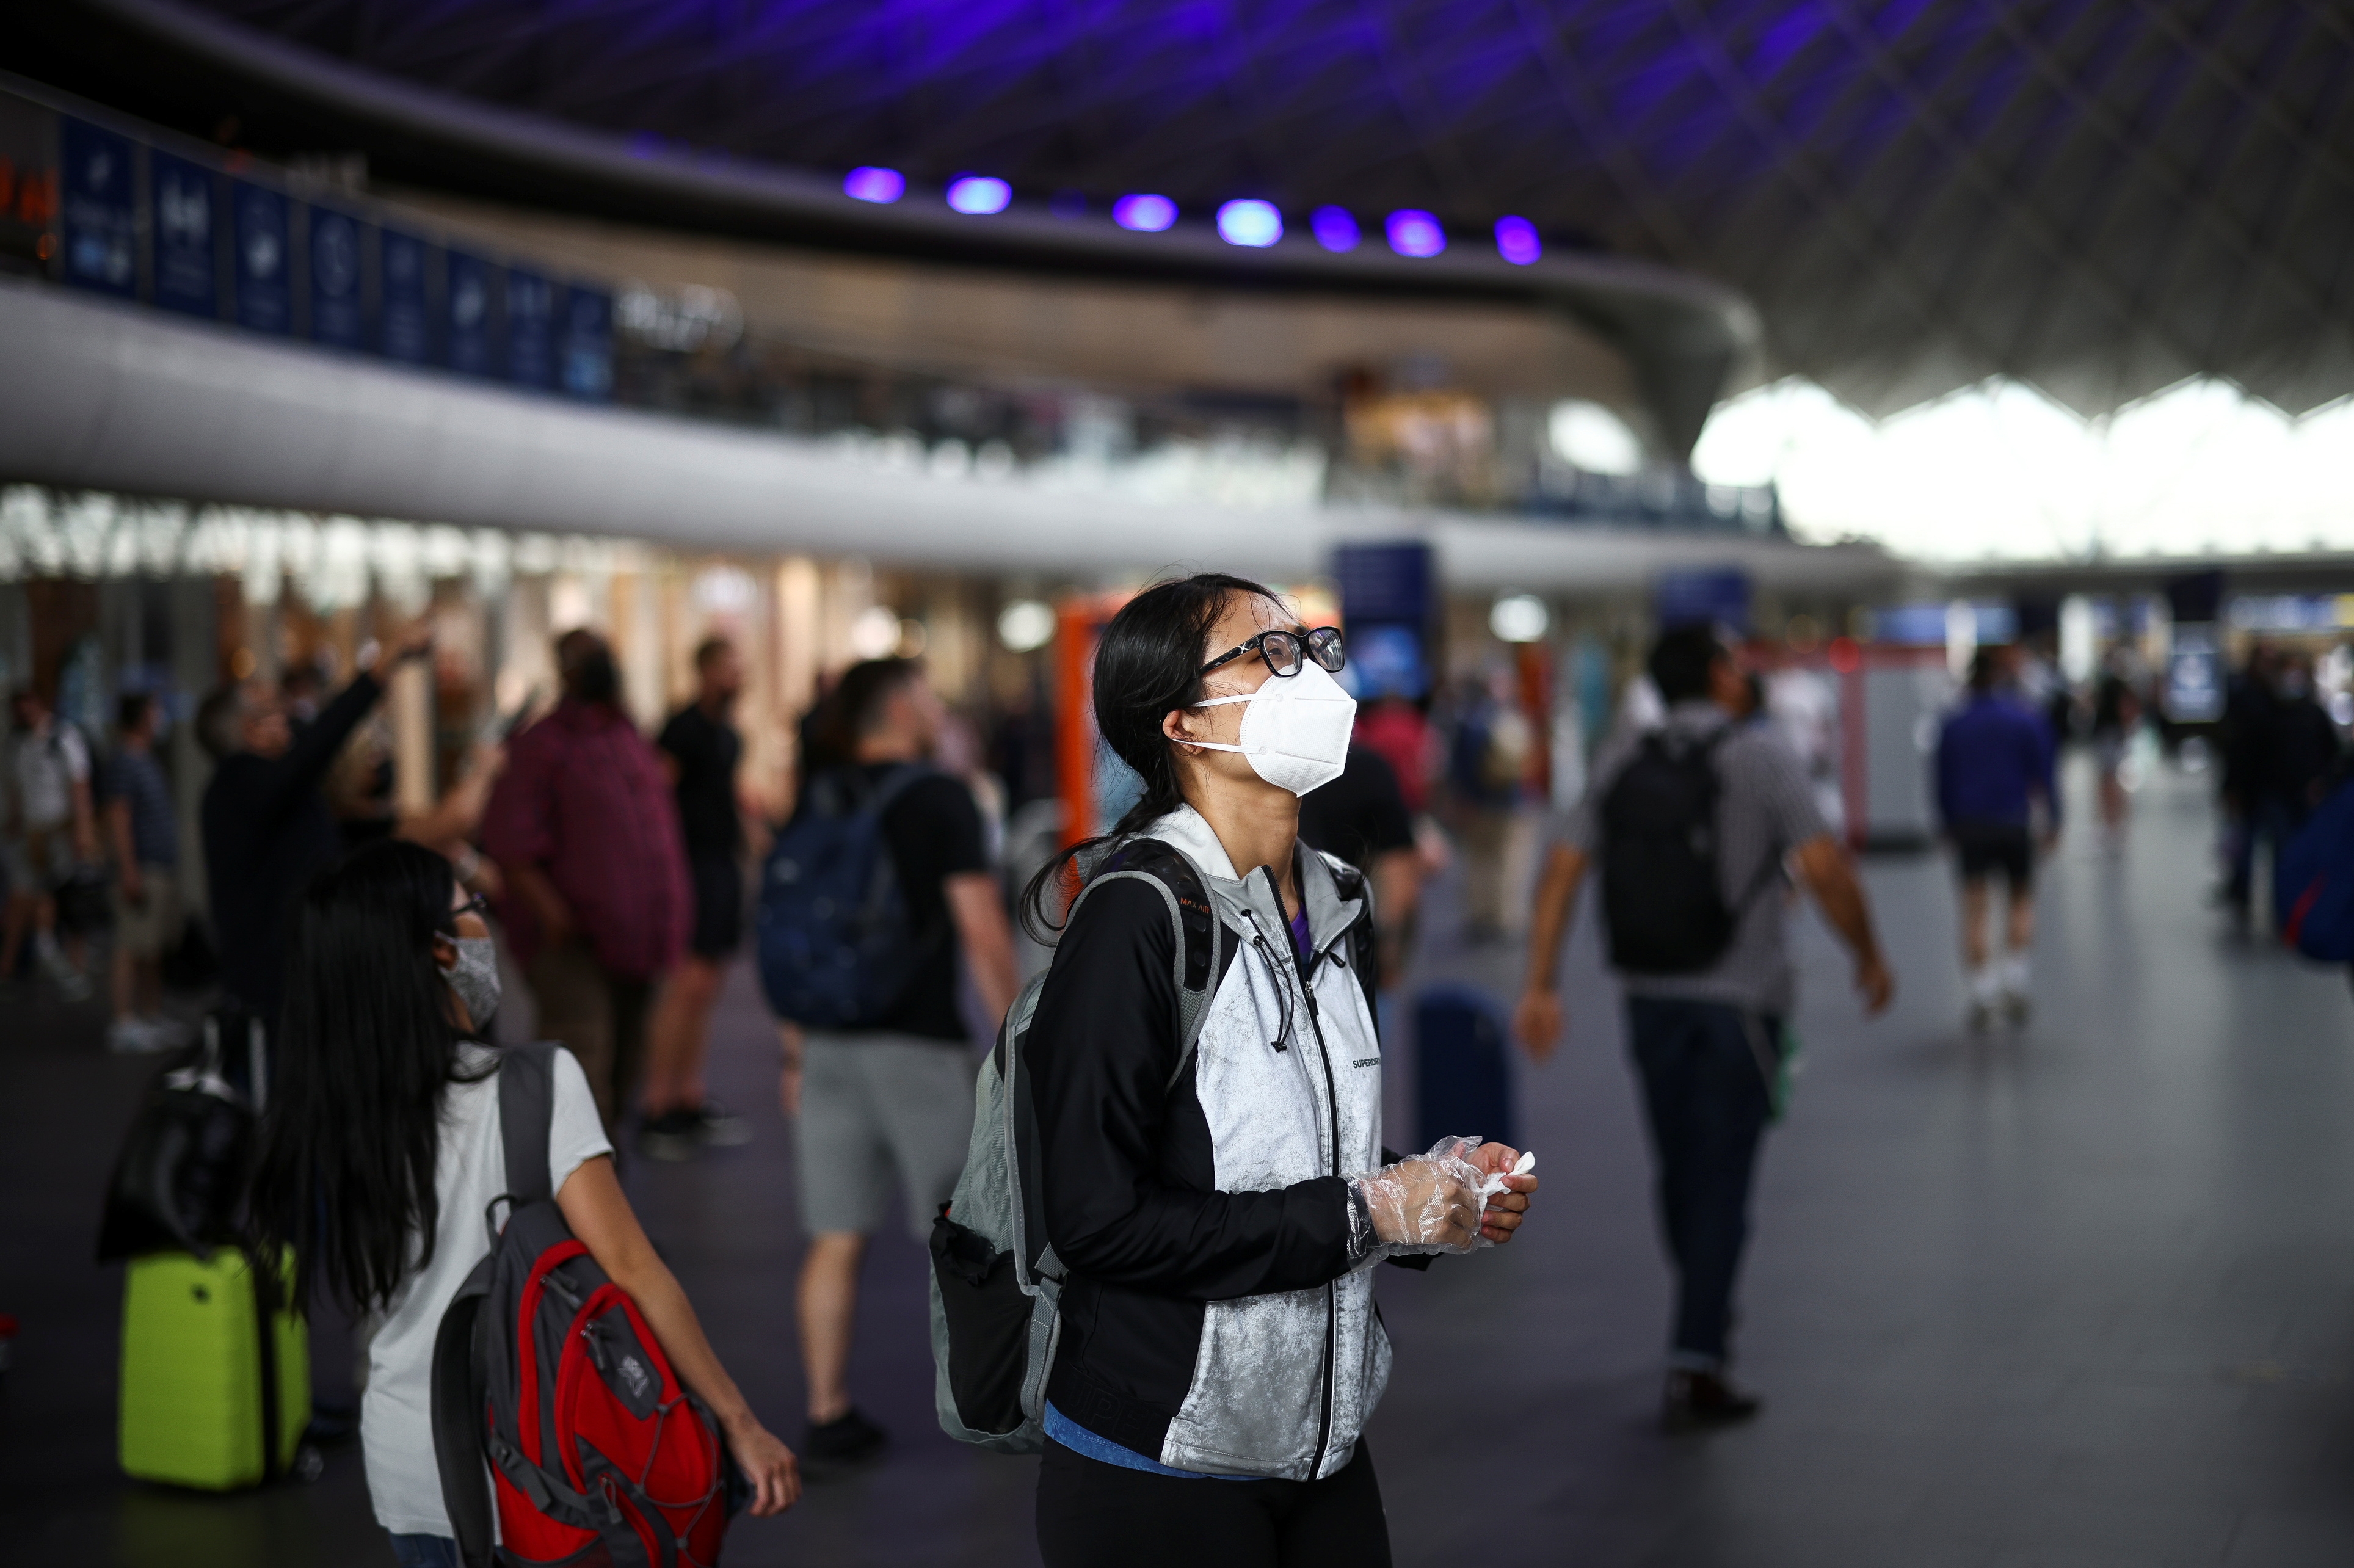 A person wearing a protective face mask stands in King's Cross Station, amid the coronavirus disease (COVID-19) outbreak in London